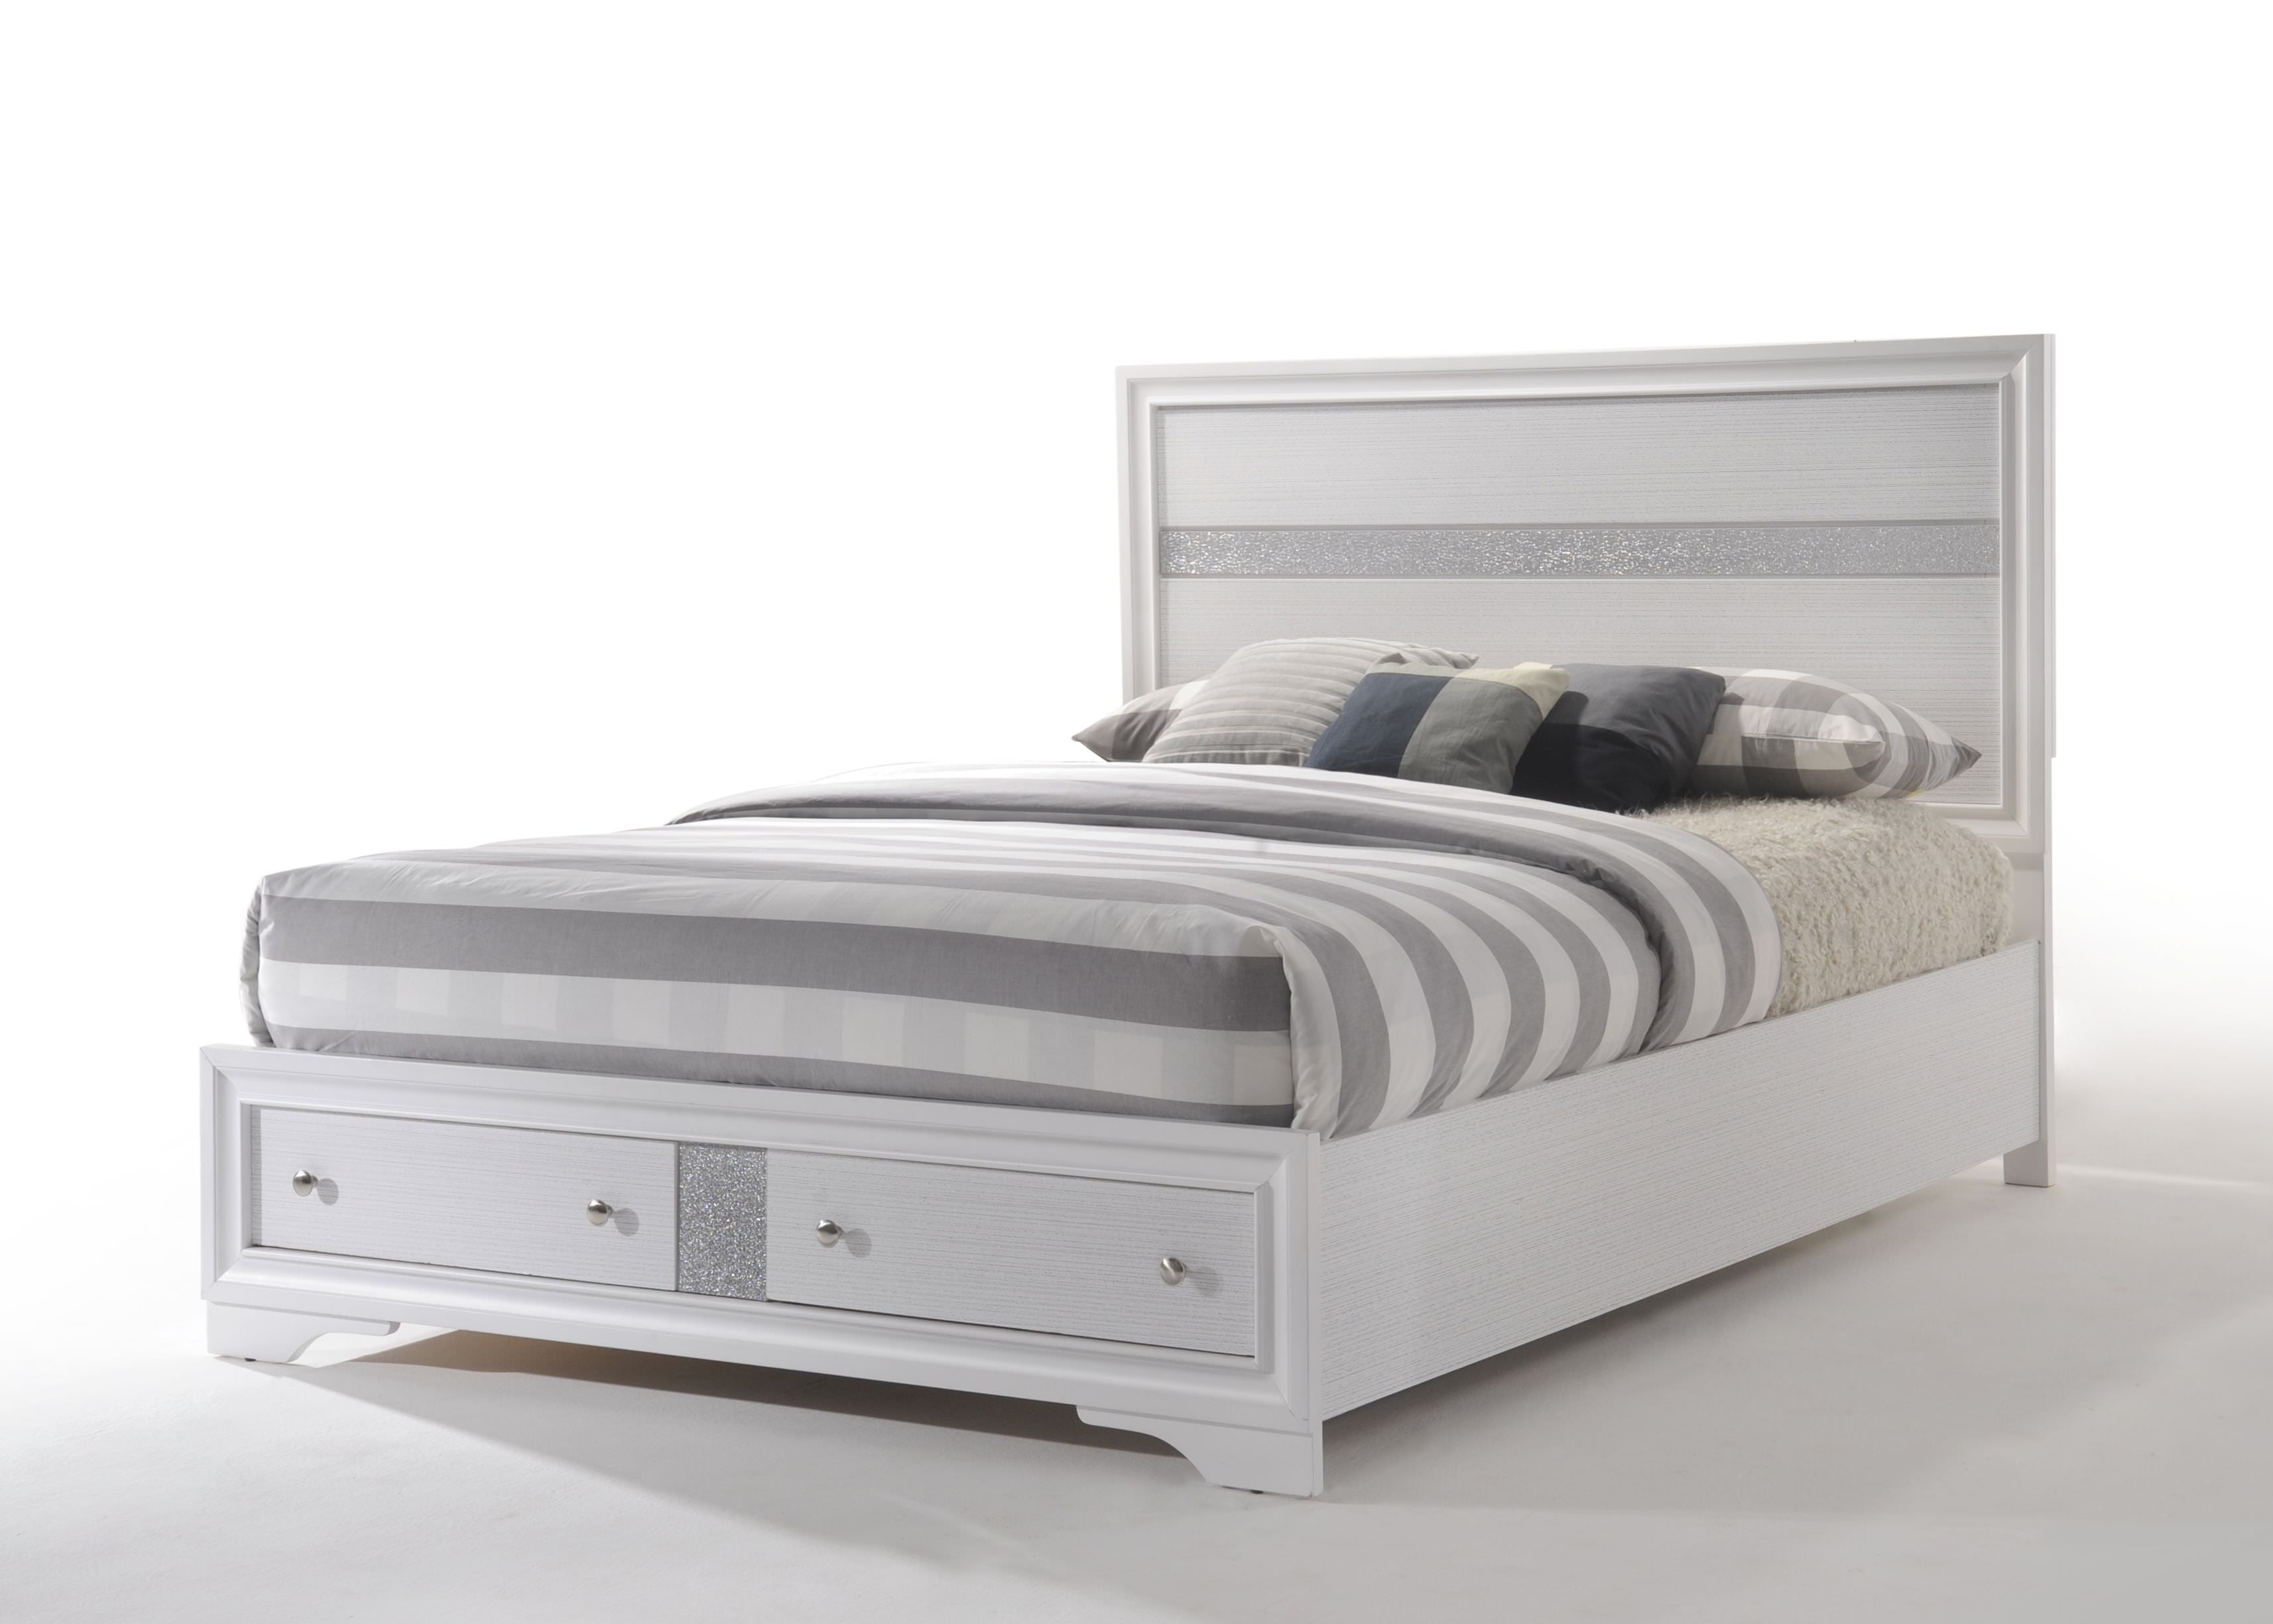 Acme Naima Eastern King Bed With, Eastern King Bed Frame With Drawers